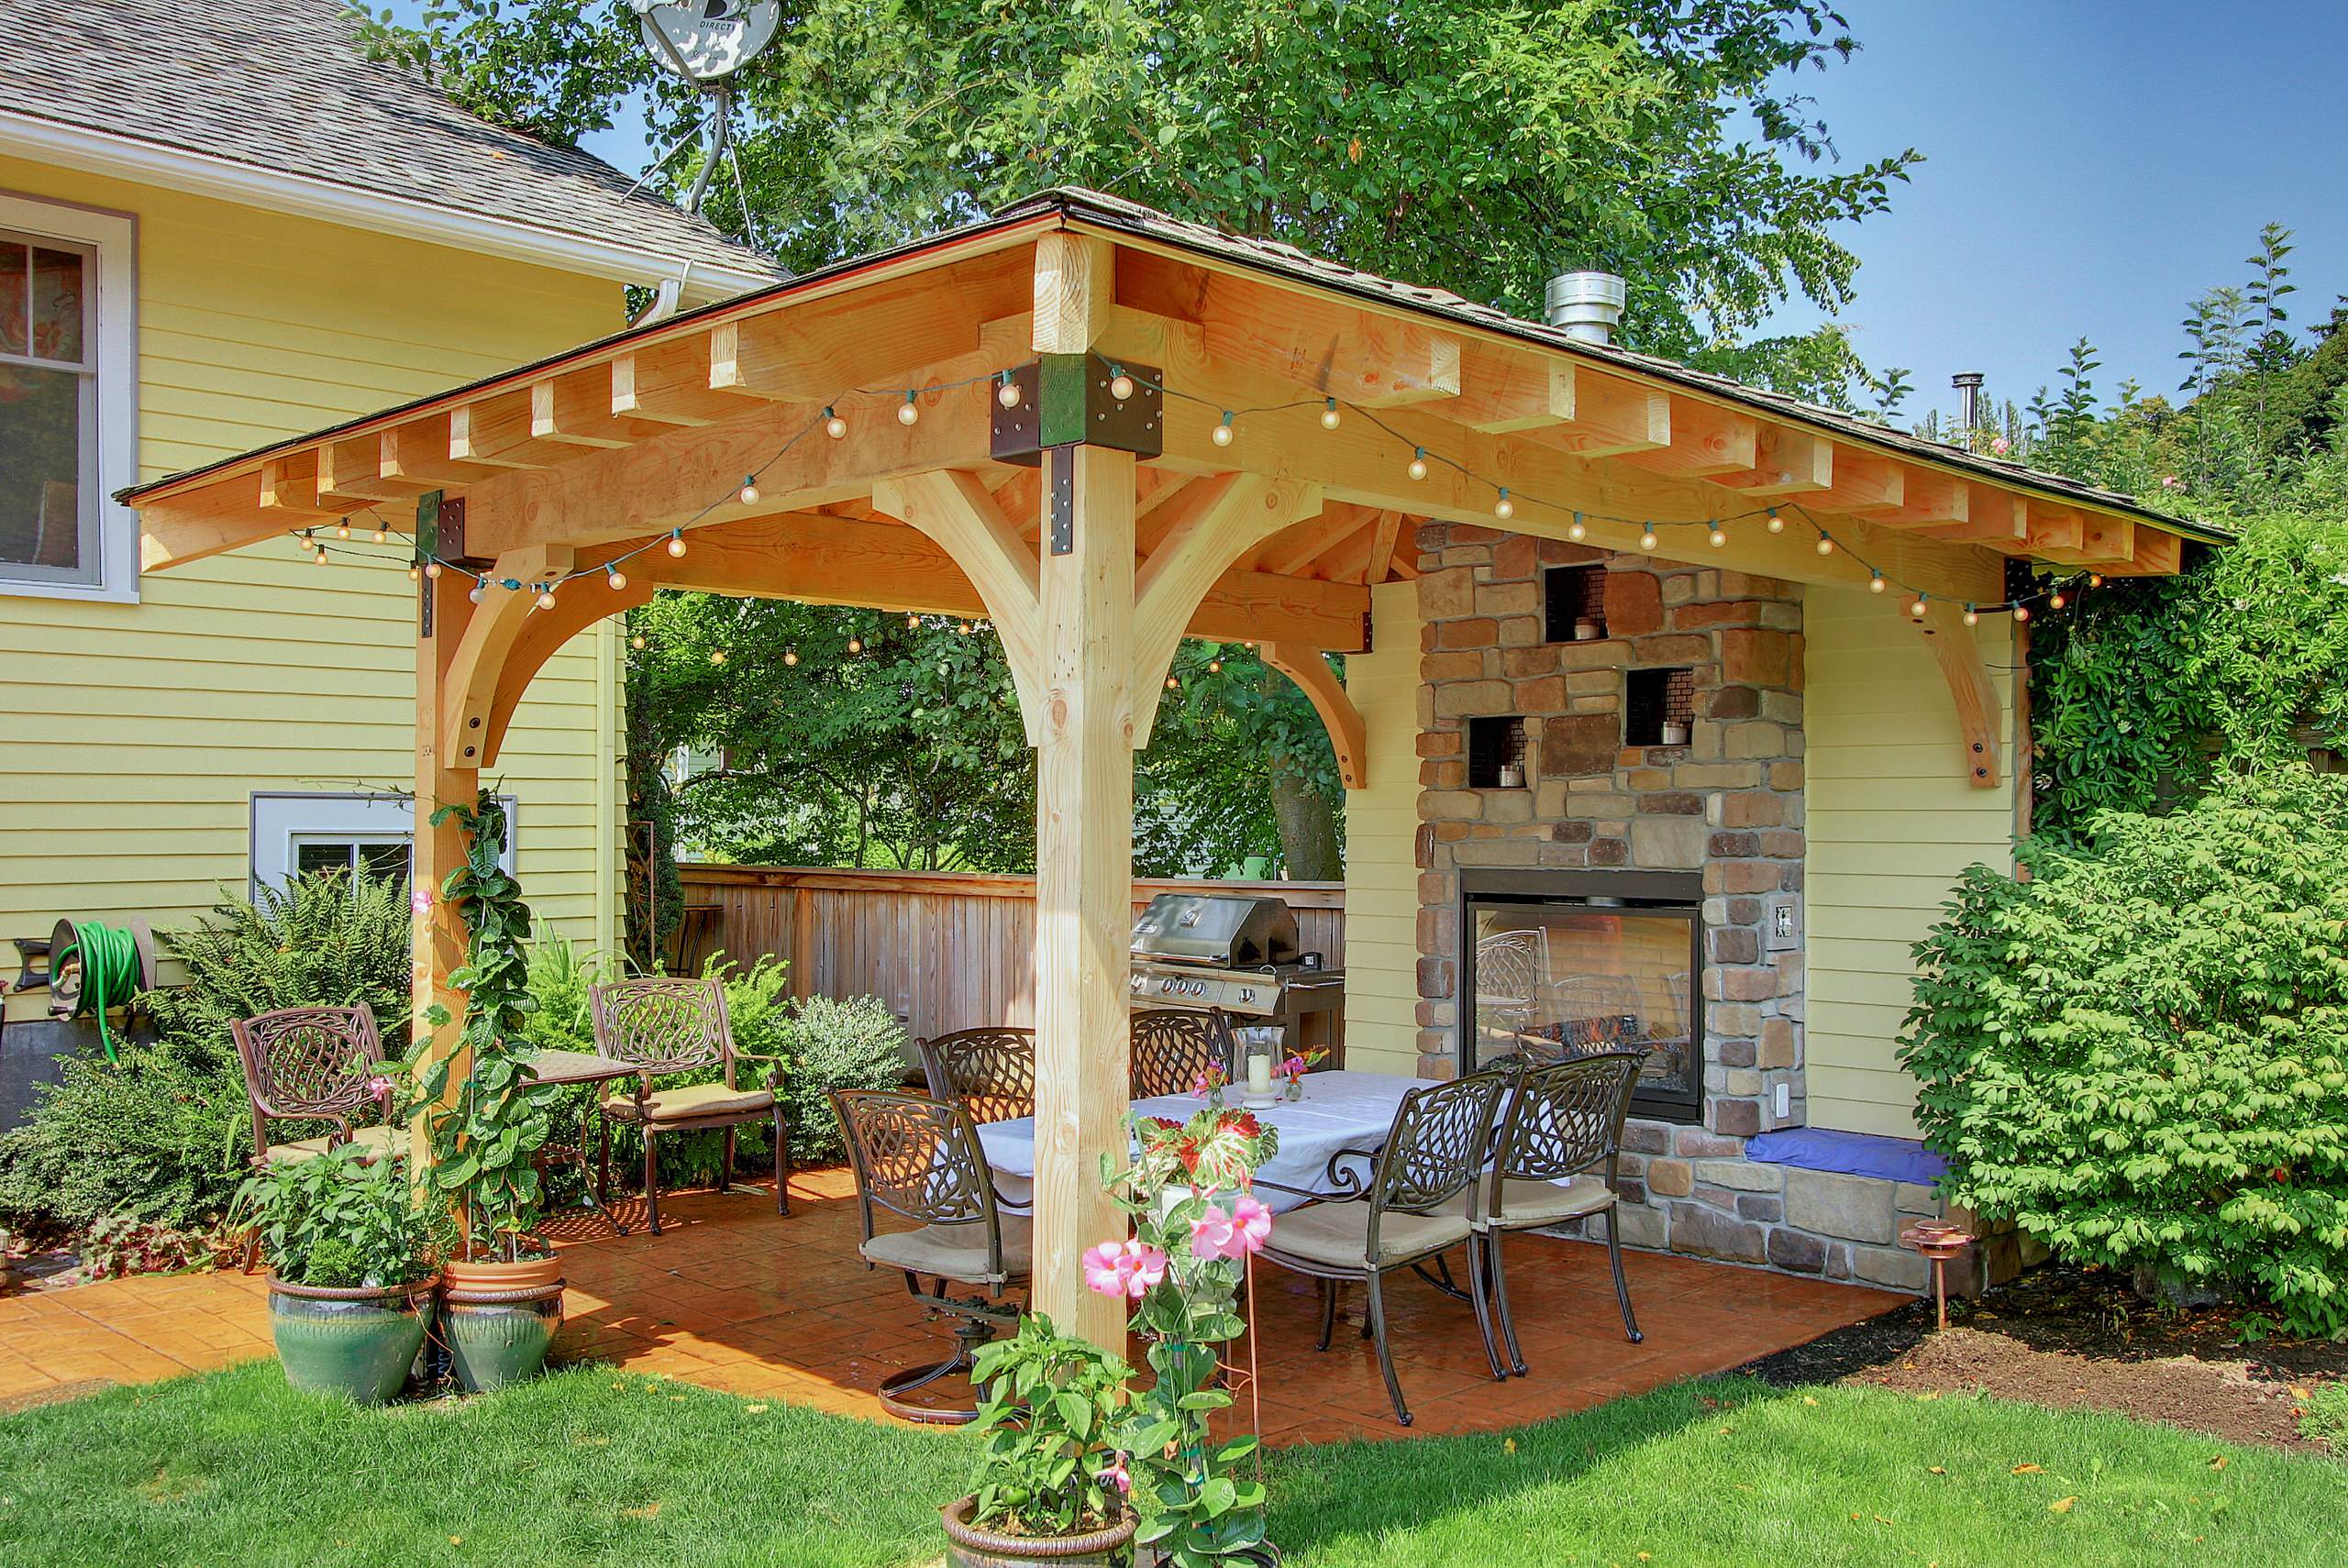 75 Outdoor With A Fire Pit And A Gazebo Ideas You'Ll Love - May, 2023 |  Houzz